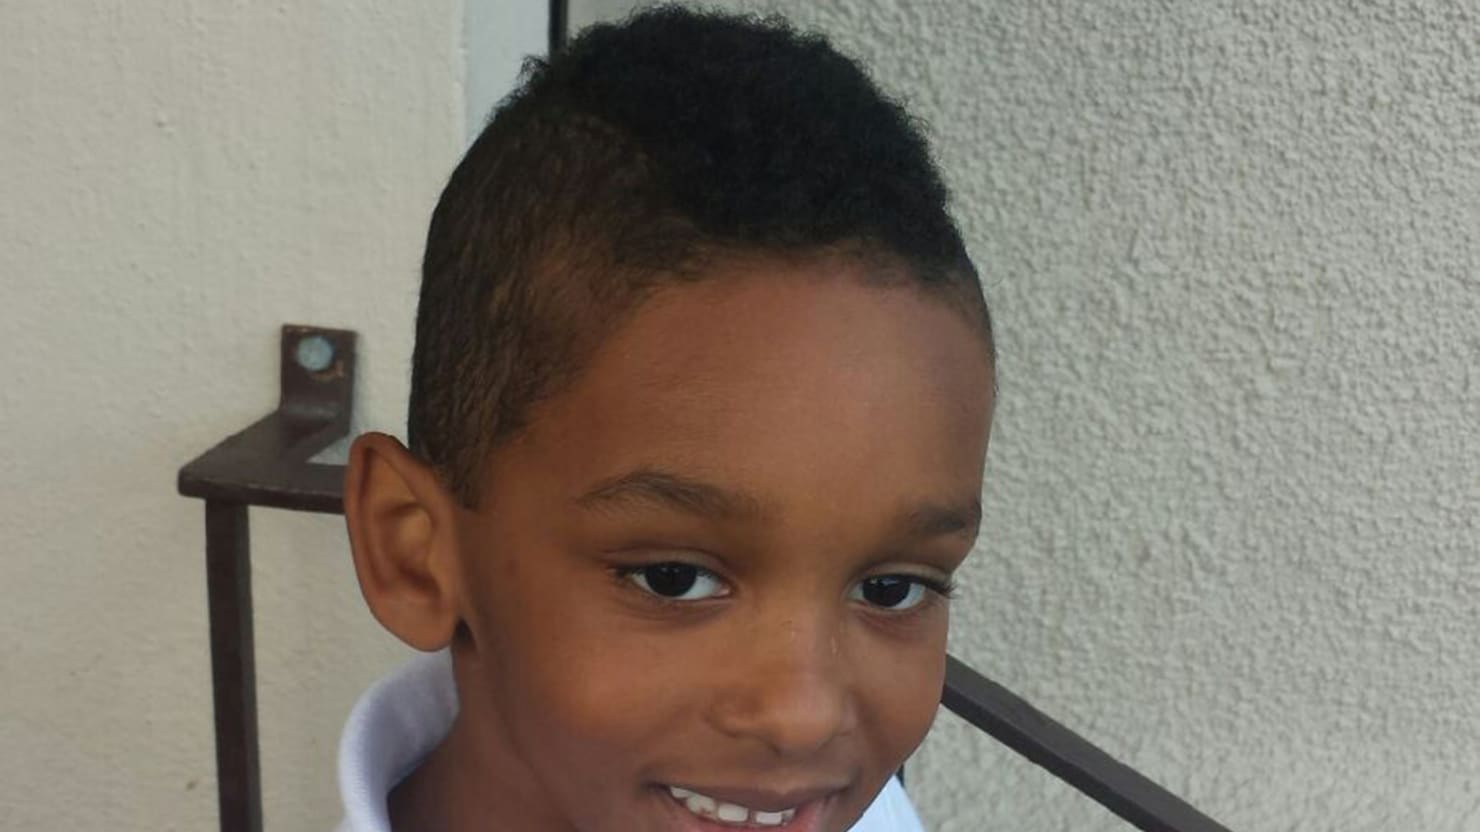 Is This 5-Year-Old's Haircut Too Extreme?